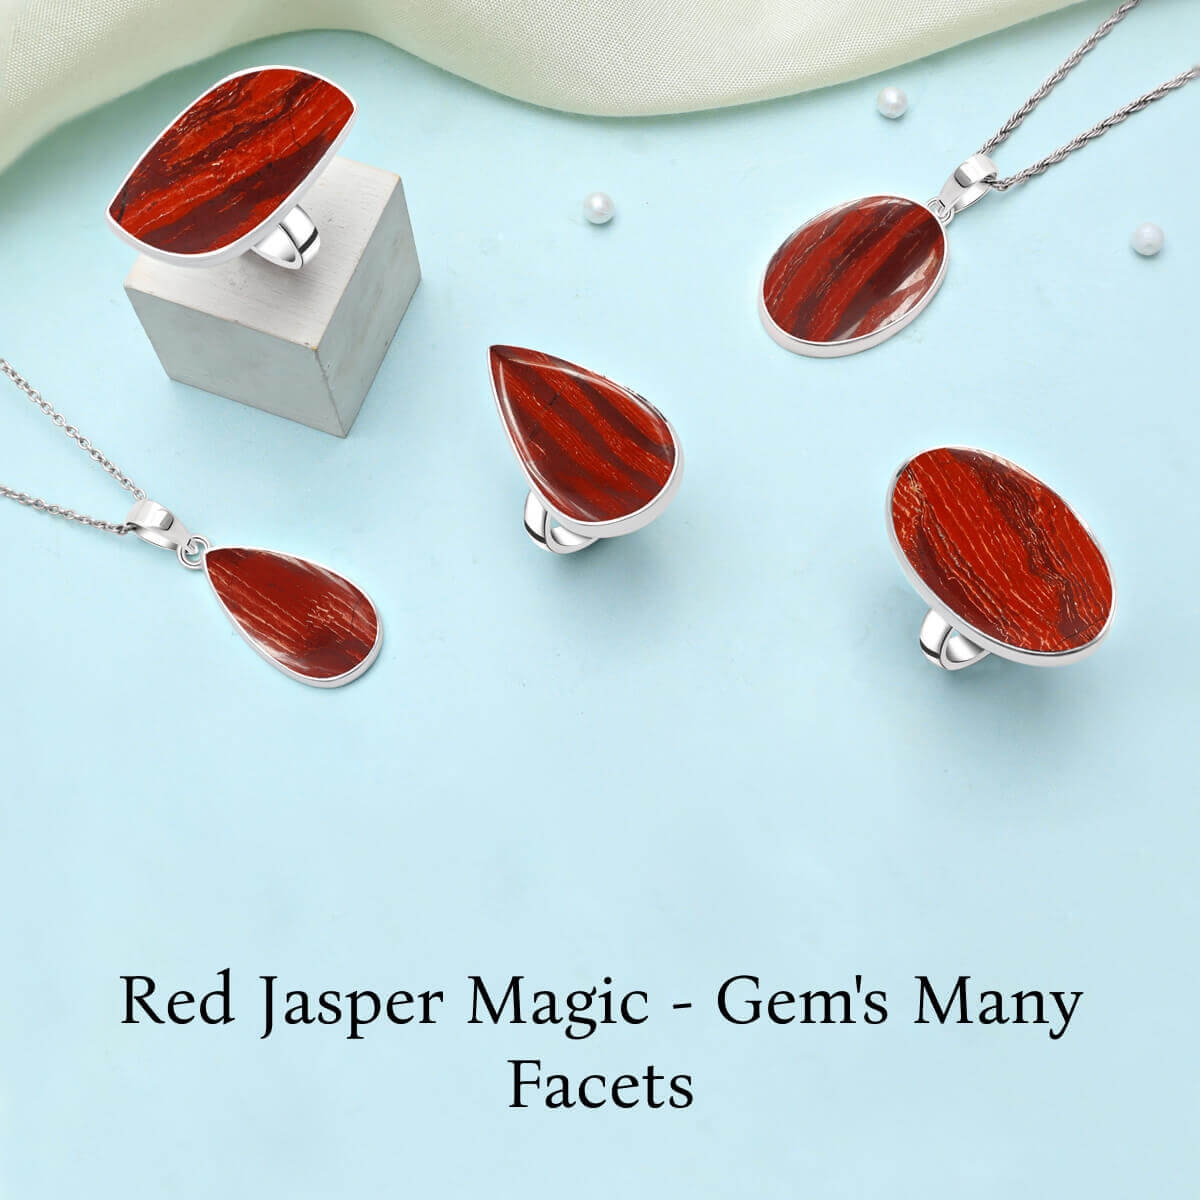 How to Use Red Jasper Gem